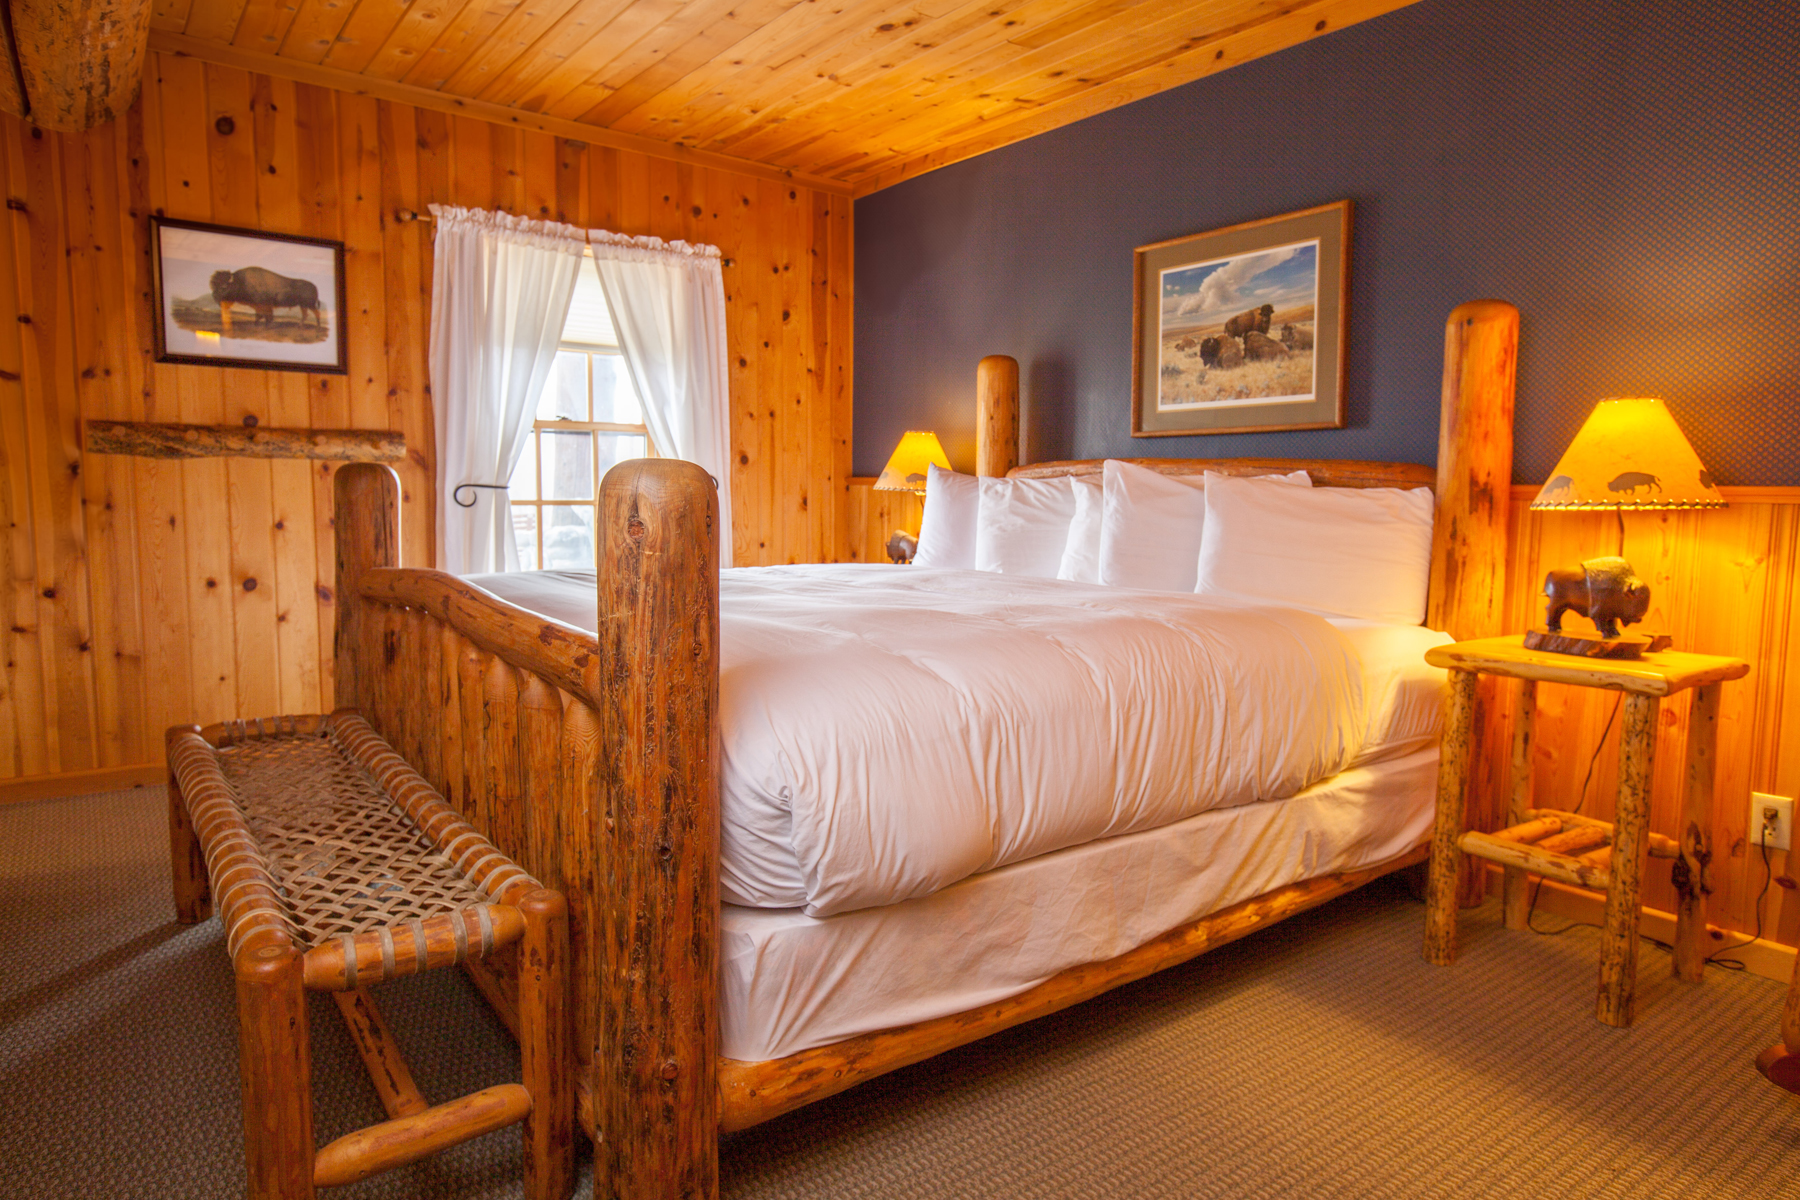 Brooks Lake Lodge features luxurious Western Craftsman-style suites and cabins complete with spa robes, goose down comforters and comfy beds for a quiet night’s rest following outdoor adventures.